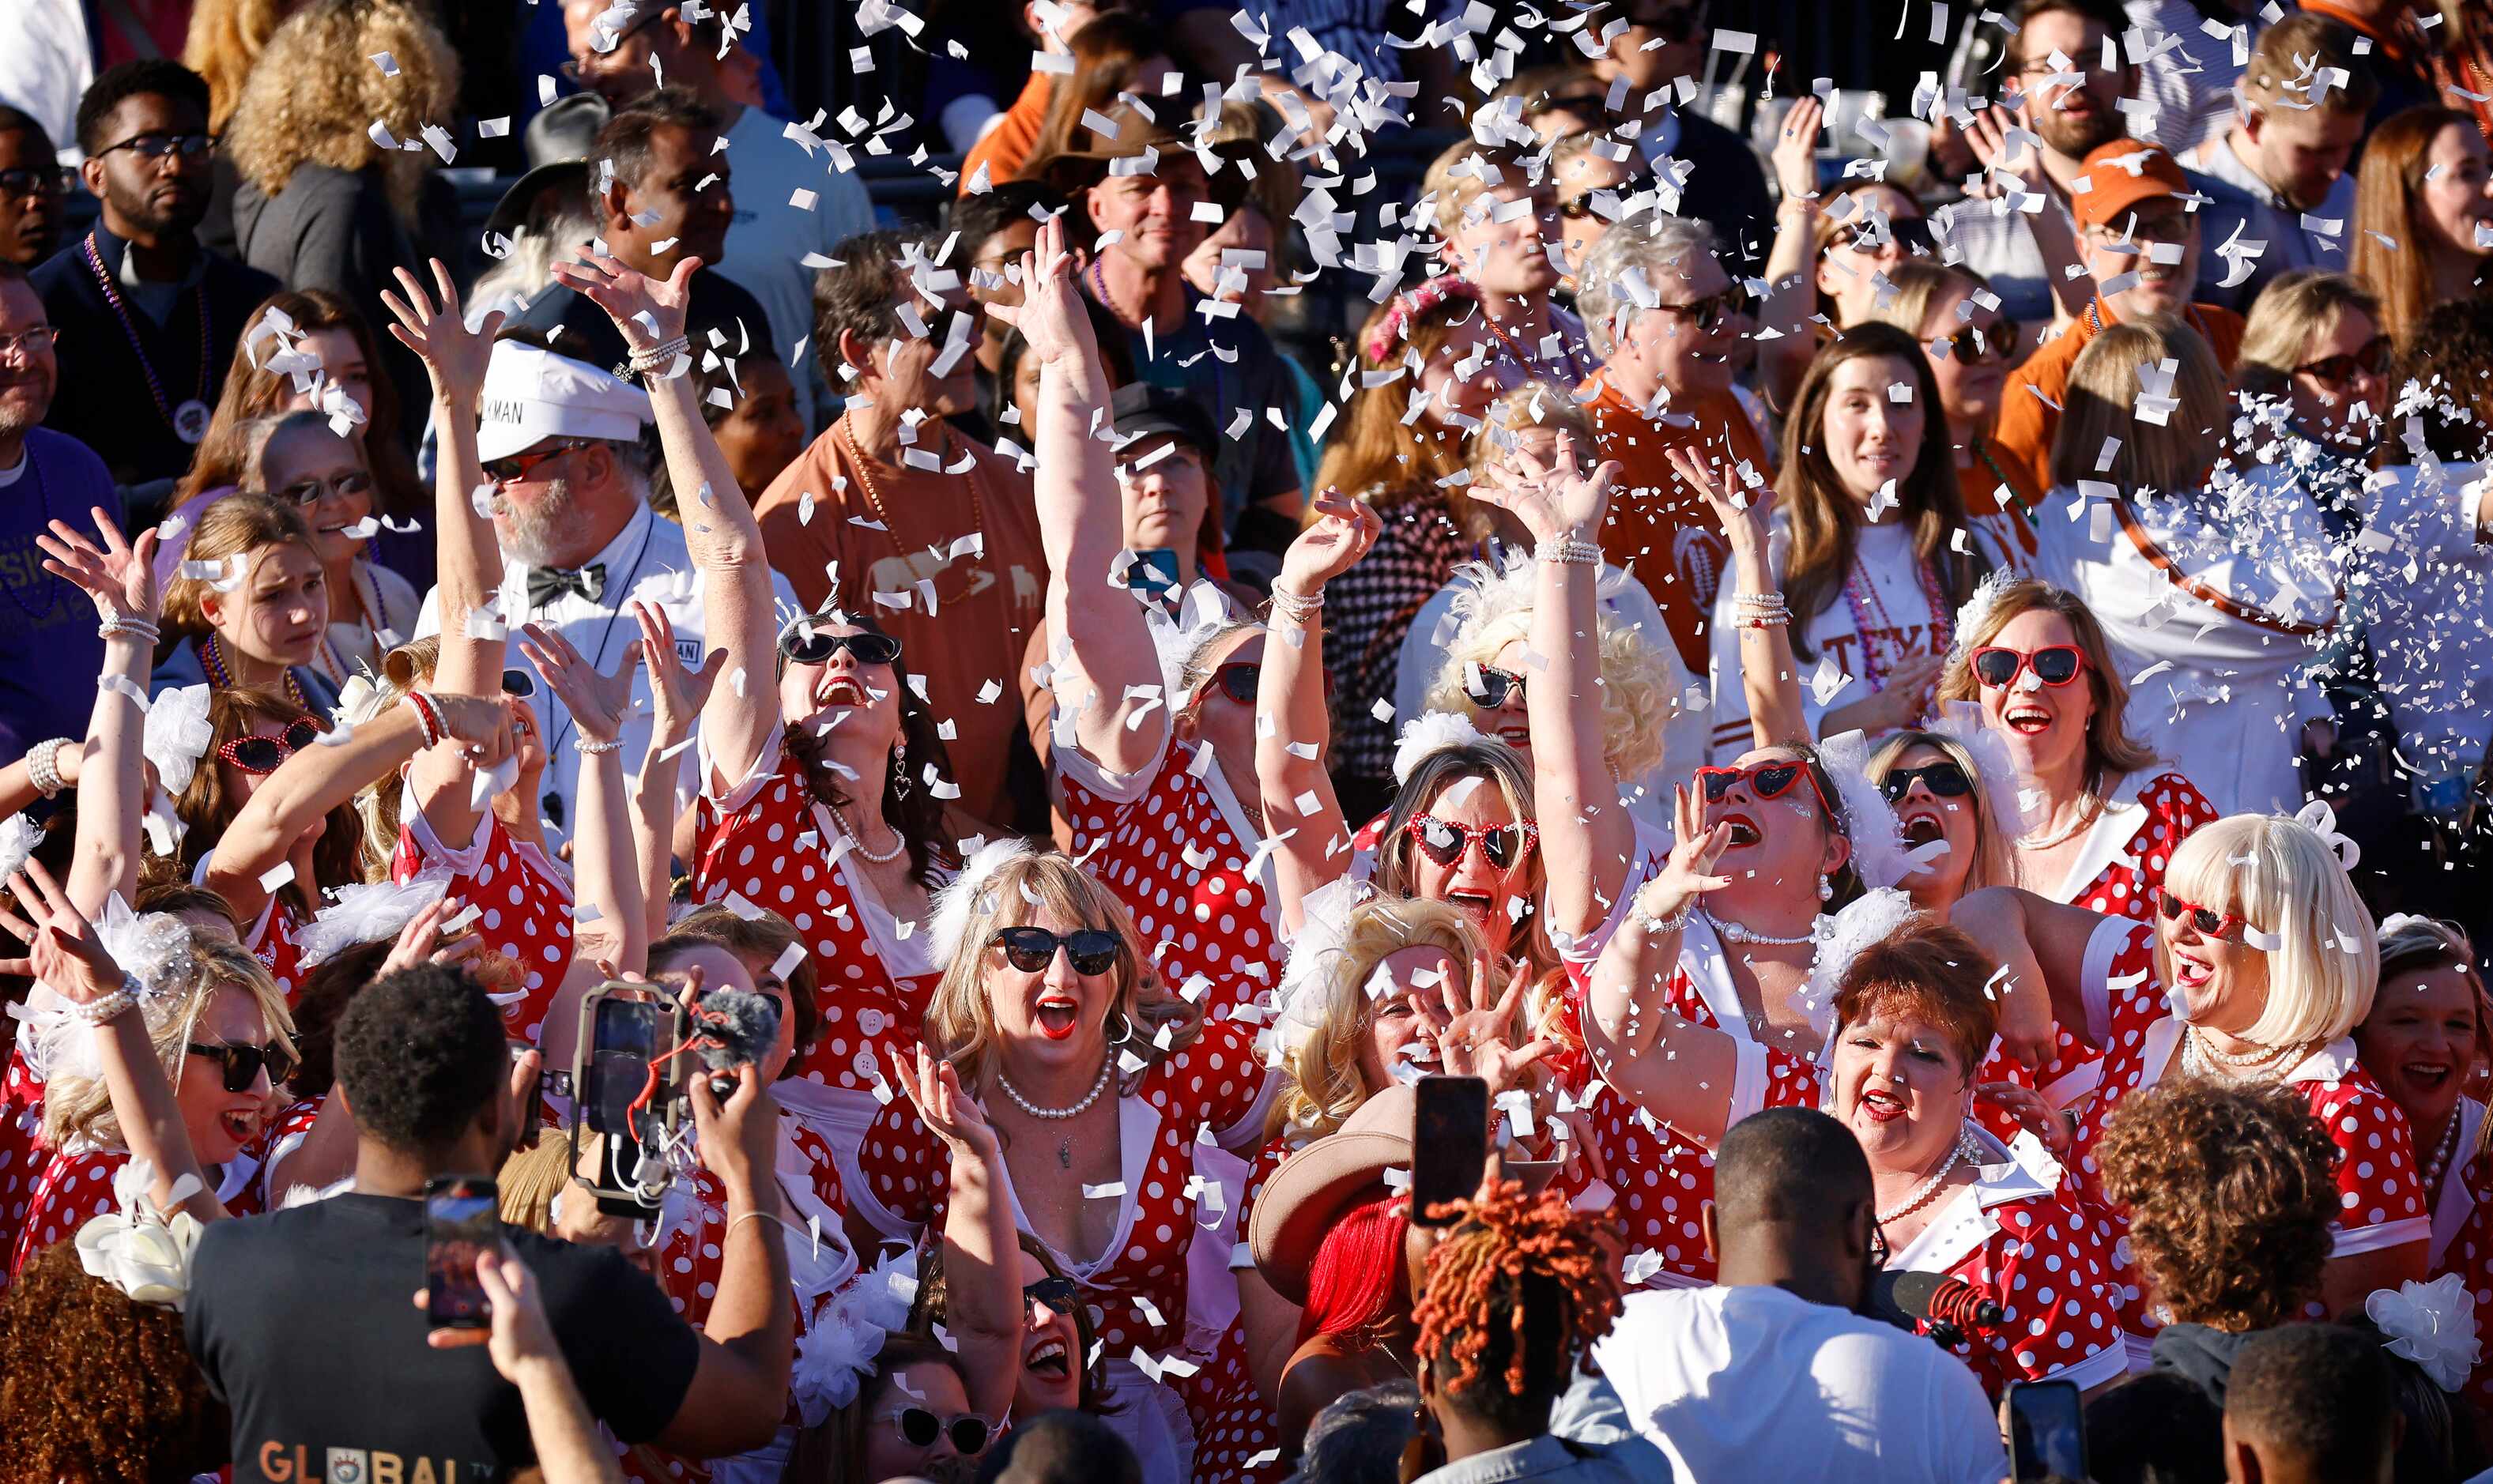 Members of the Mande Milkshakers toss confetti at the end of their performance in the Mardi...